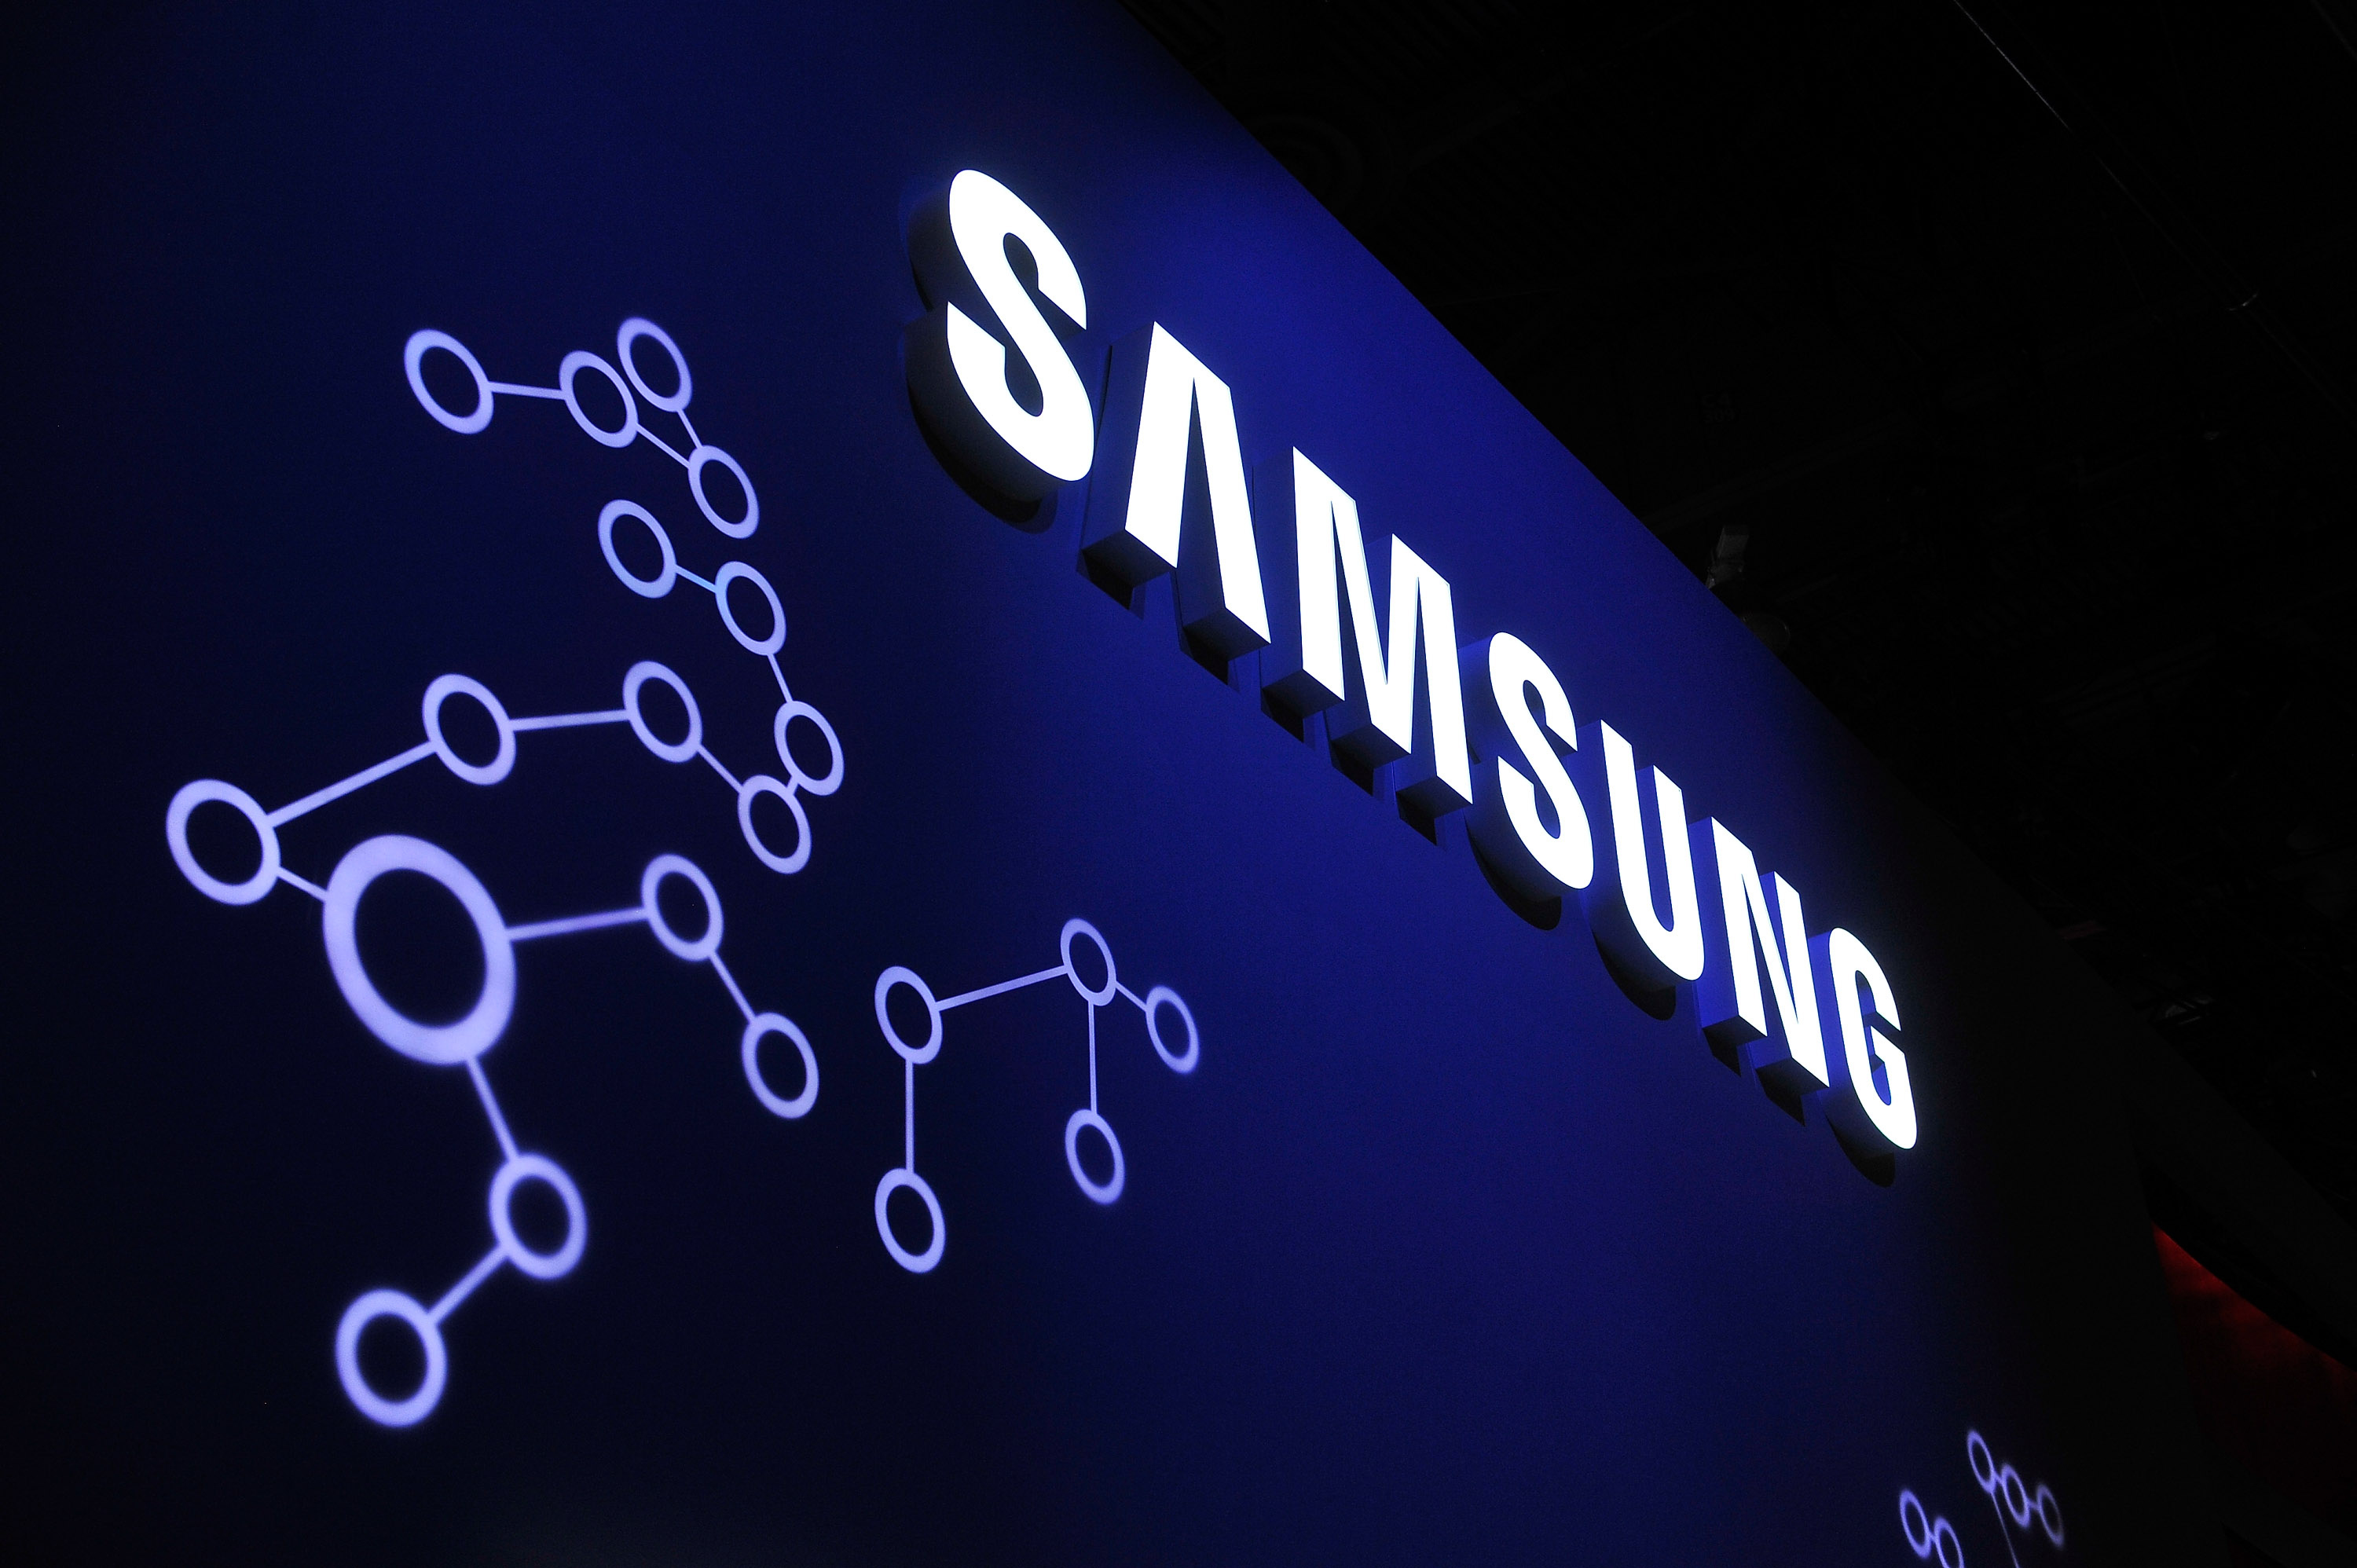 A general view of the Samsung booth at the 2015 International CES at the Las Vegas Convention Center on January 6, 2015 in Las Vegas, Nevada. (David Becker—Getty Images)